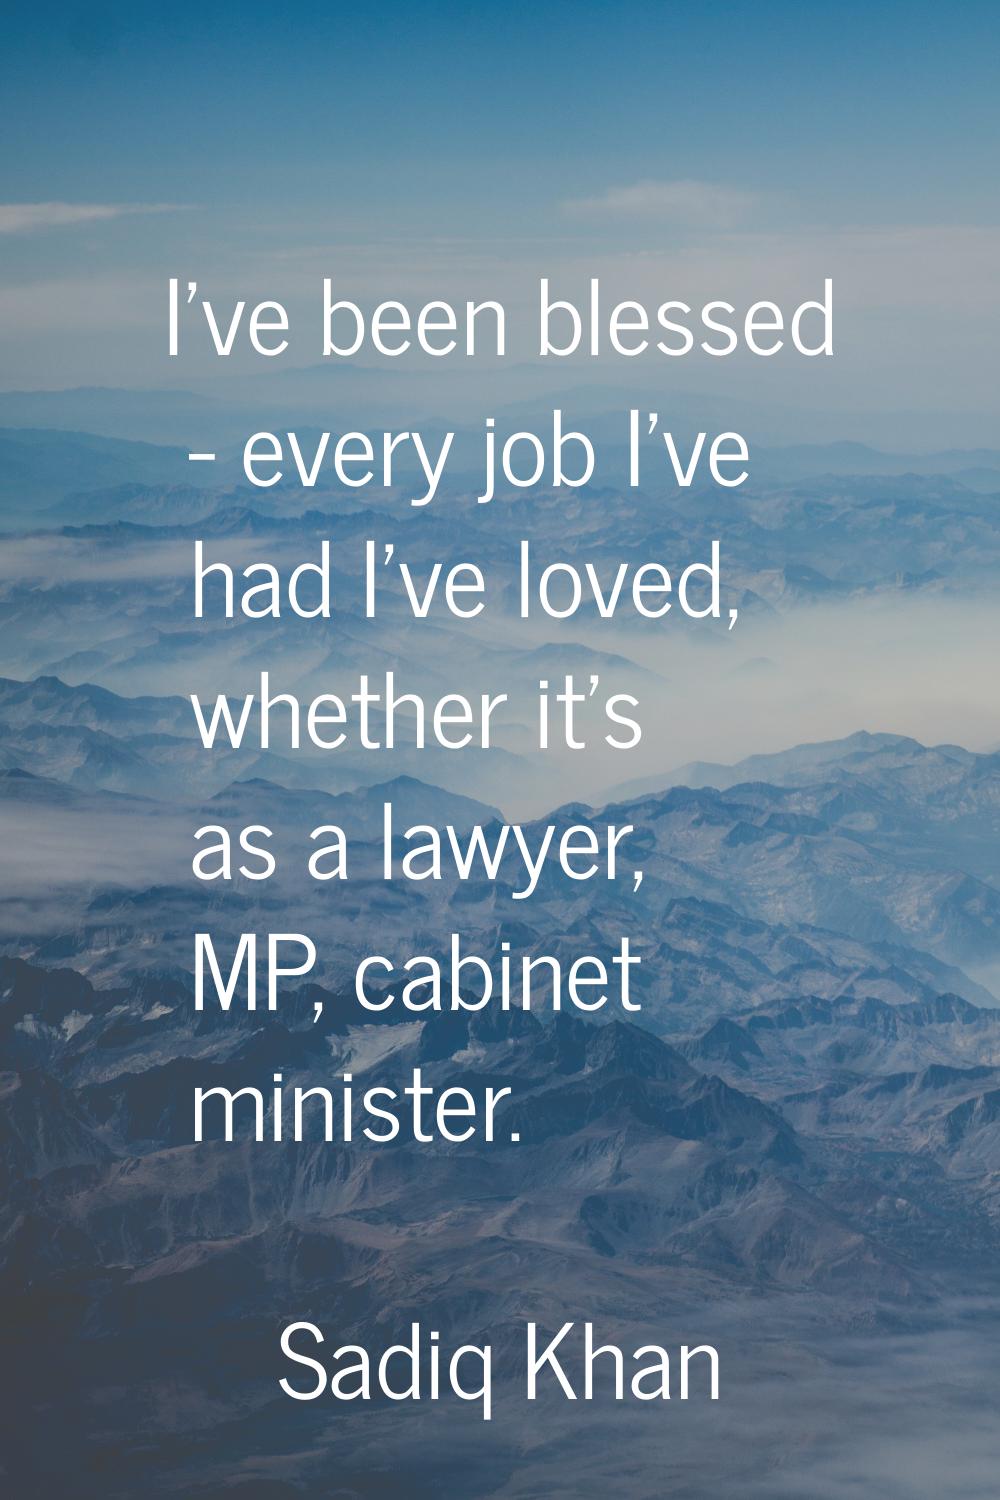 I've been blessed - every job I've had I've loved, whether it's as a lawyer, MP, cabinet minister.